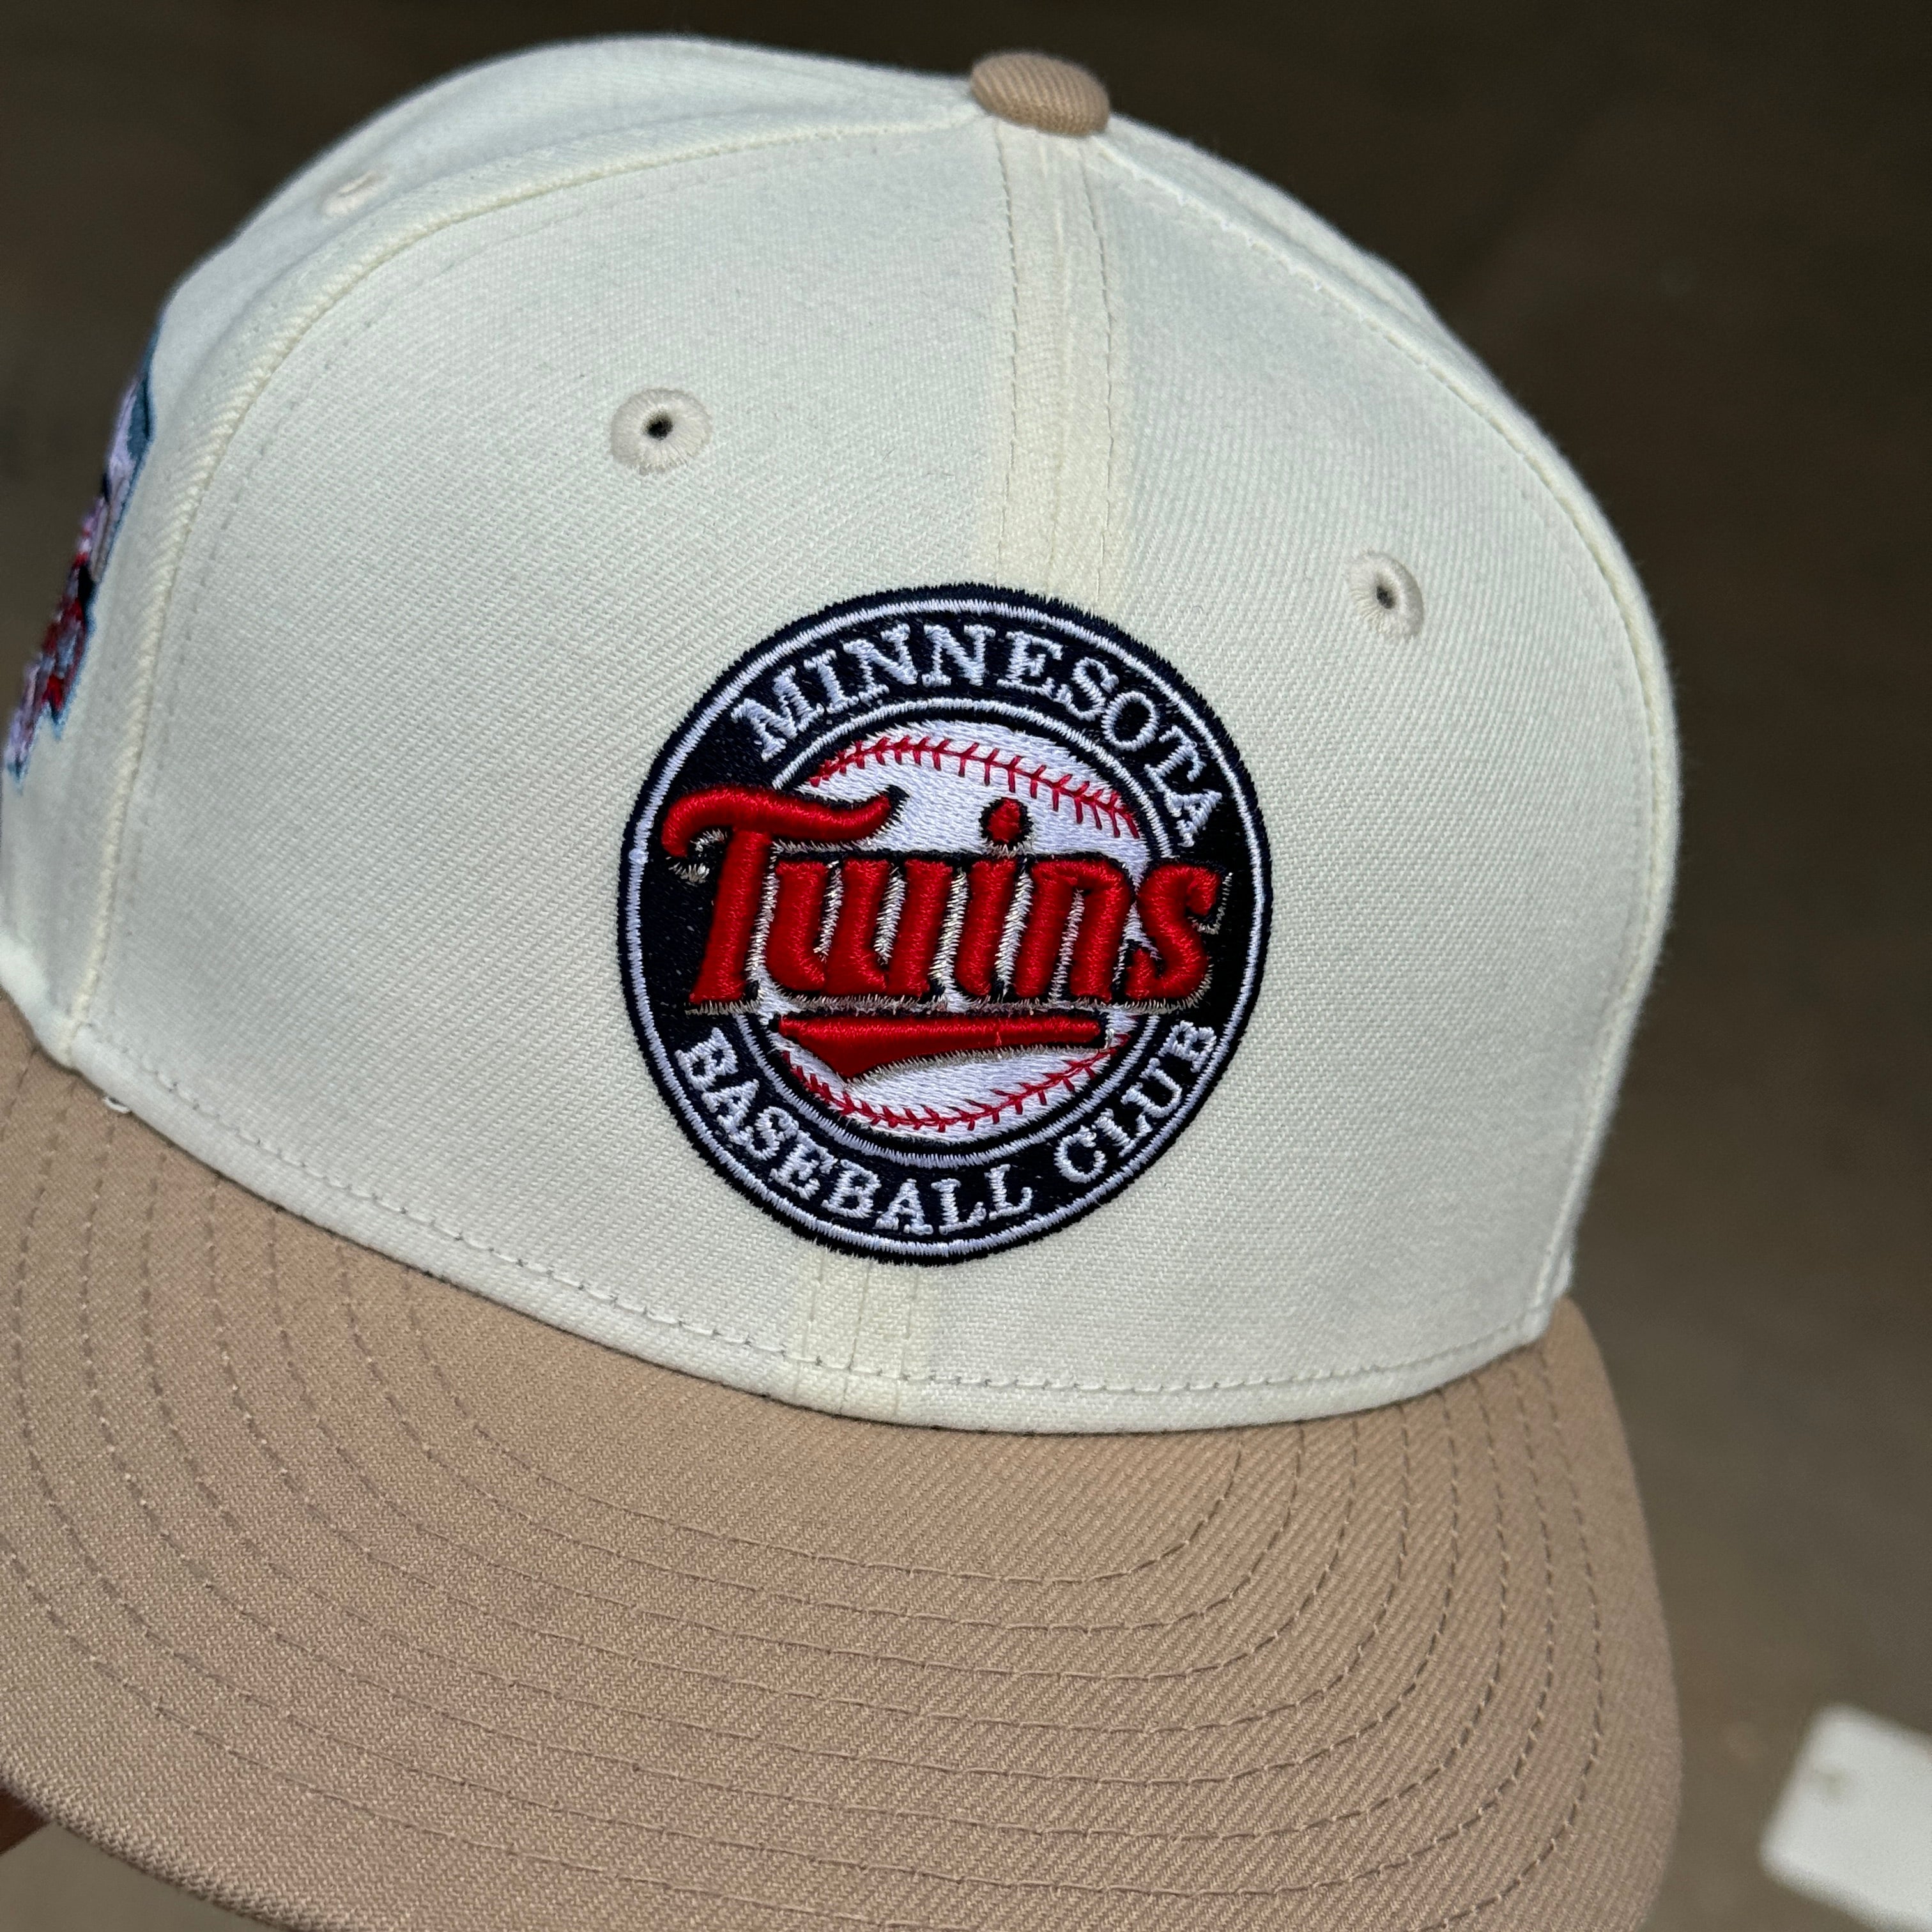 USED 1/8 Chrome Minnesota Twins All Star Game 2014 59fifty New Era Fitted Hat Cap